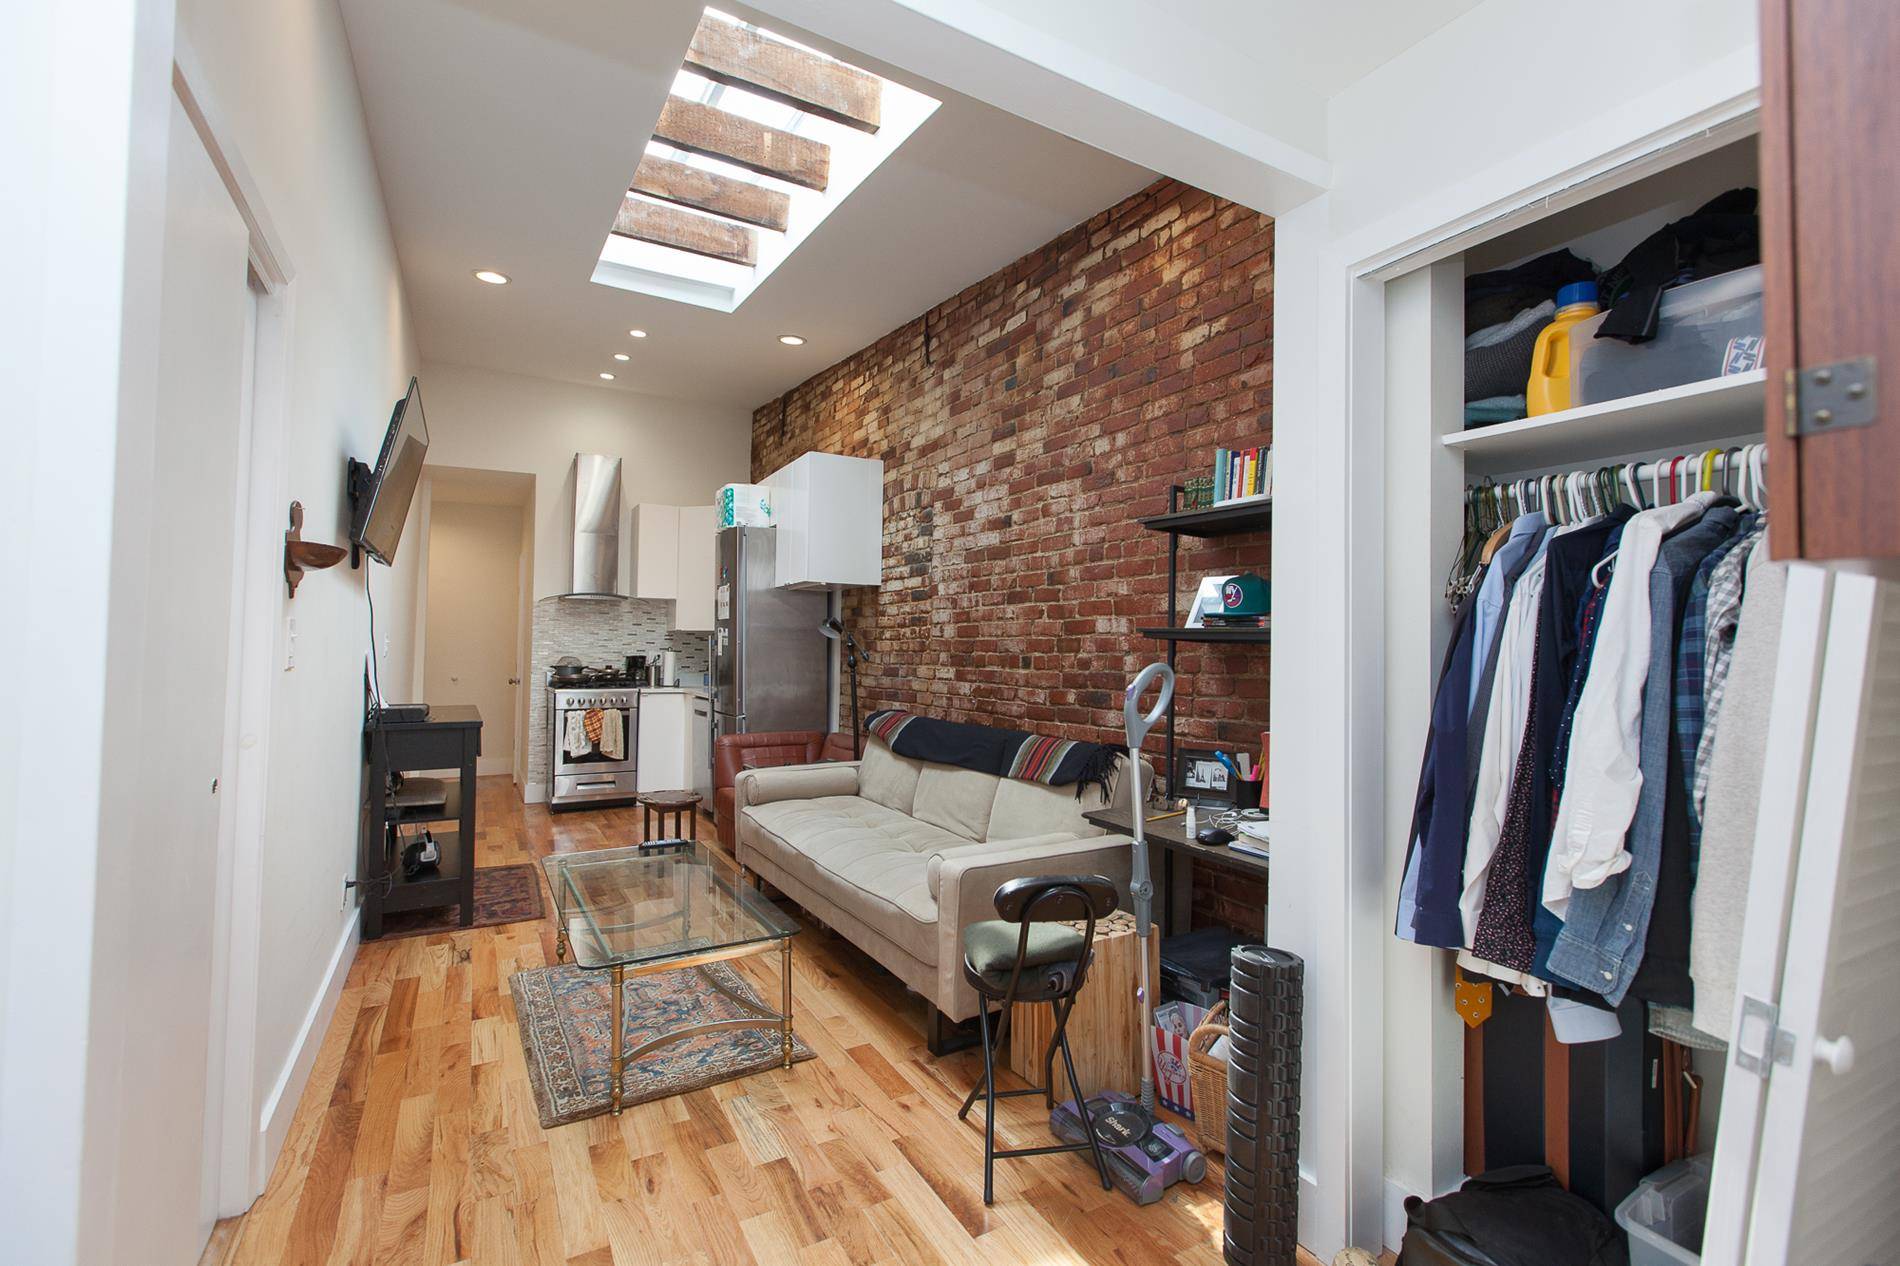 Beautifully renovated pre war 2BR in Greenpoint with high end appliances, great built in cabinetry, a skylight, and lovely exposed brick walls.